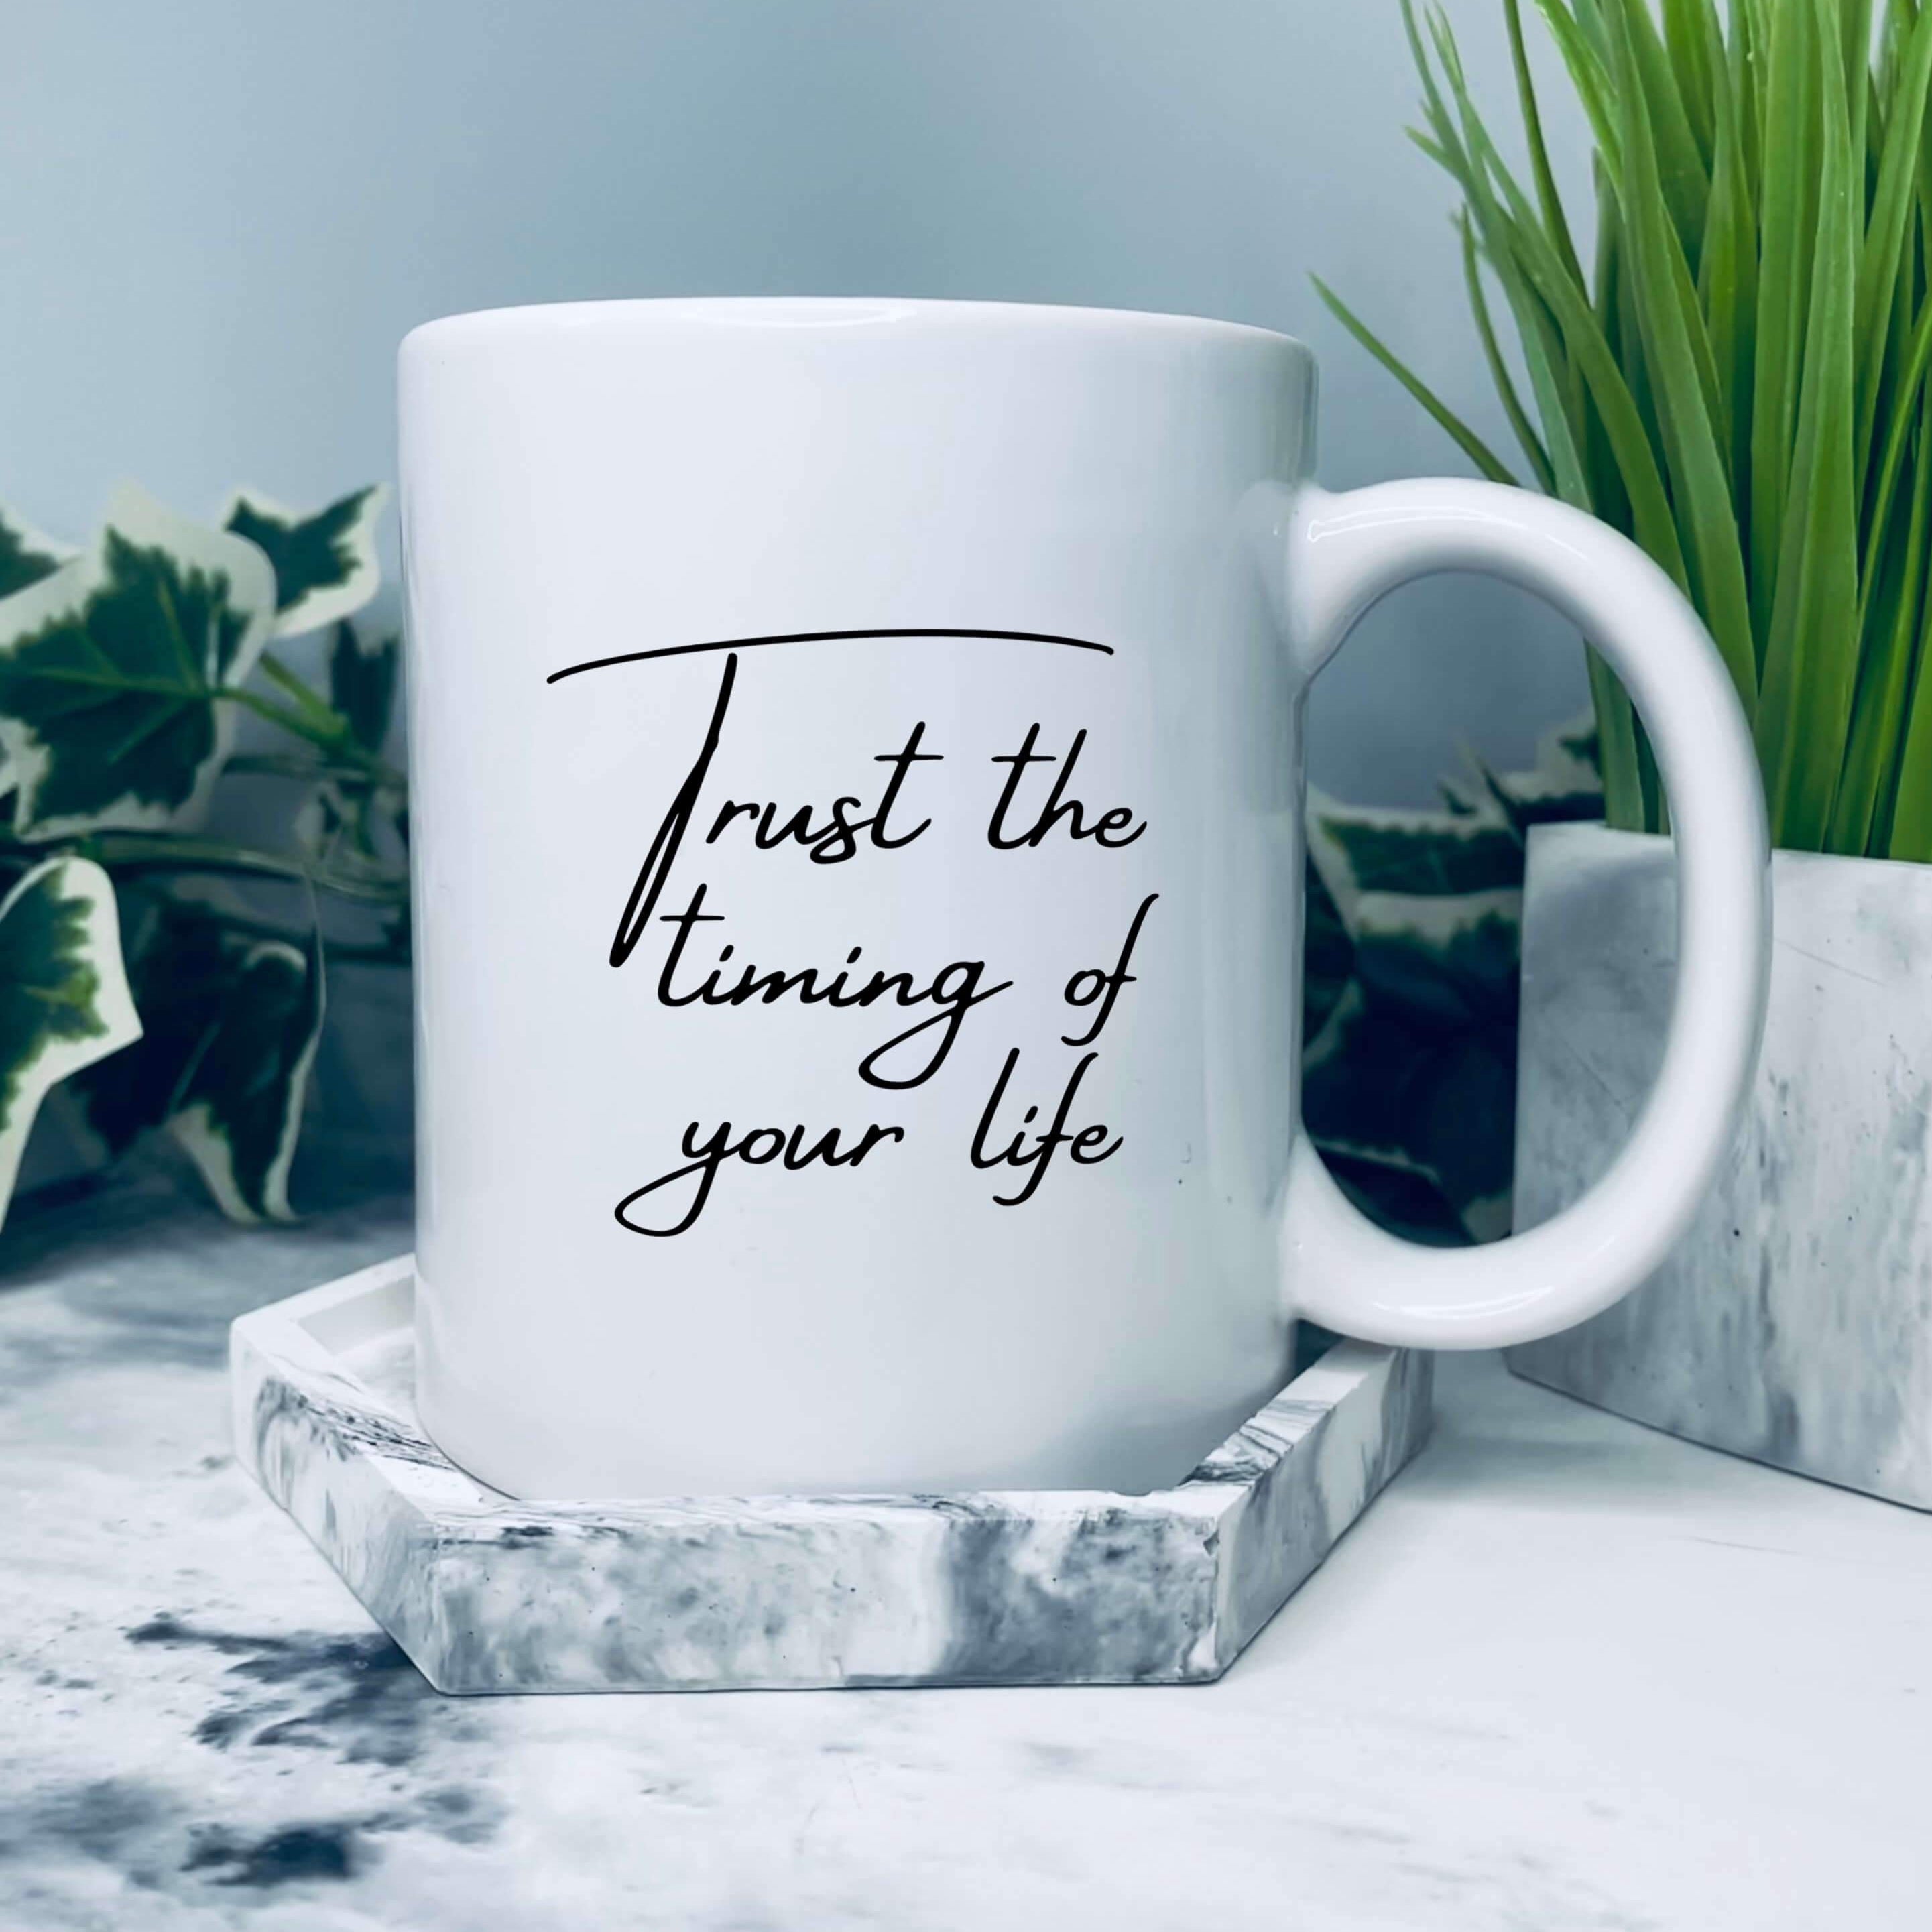 Mug that says: Trust the timing of your life